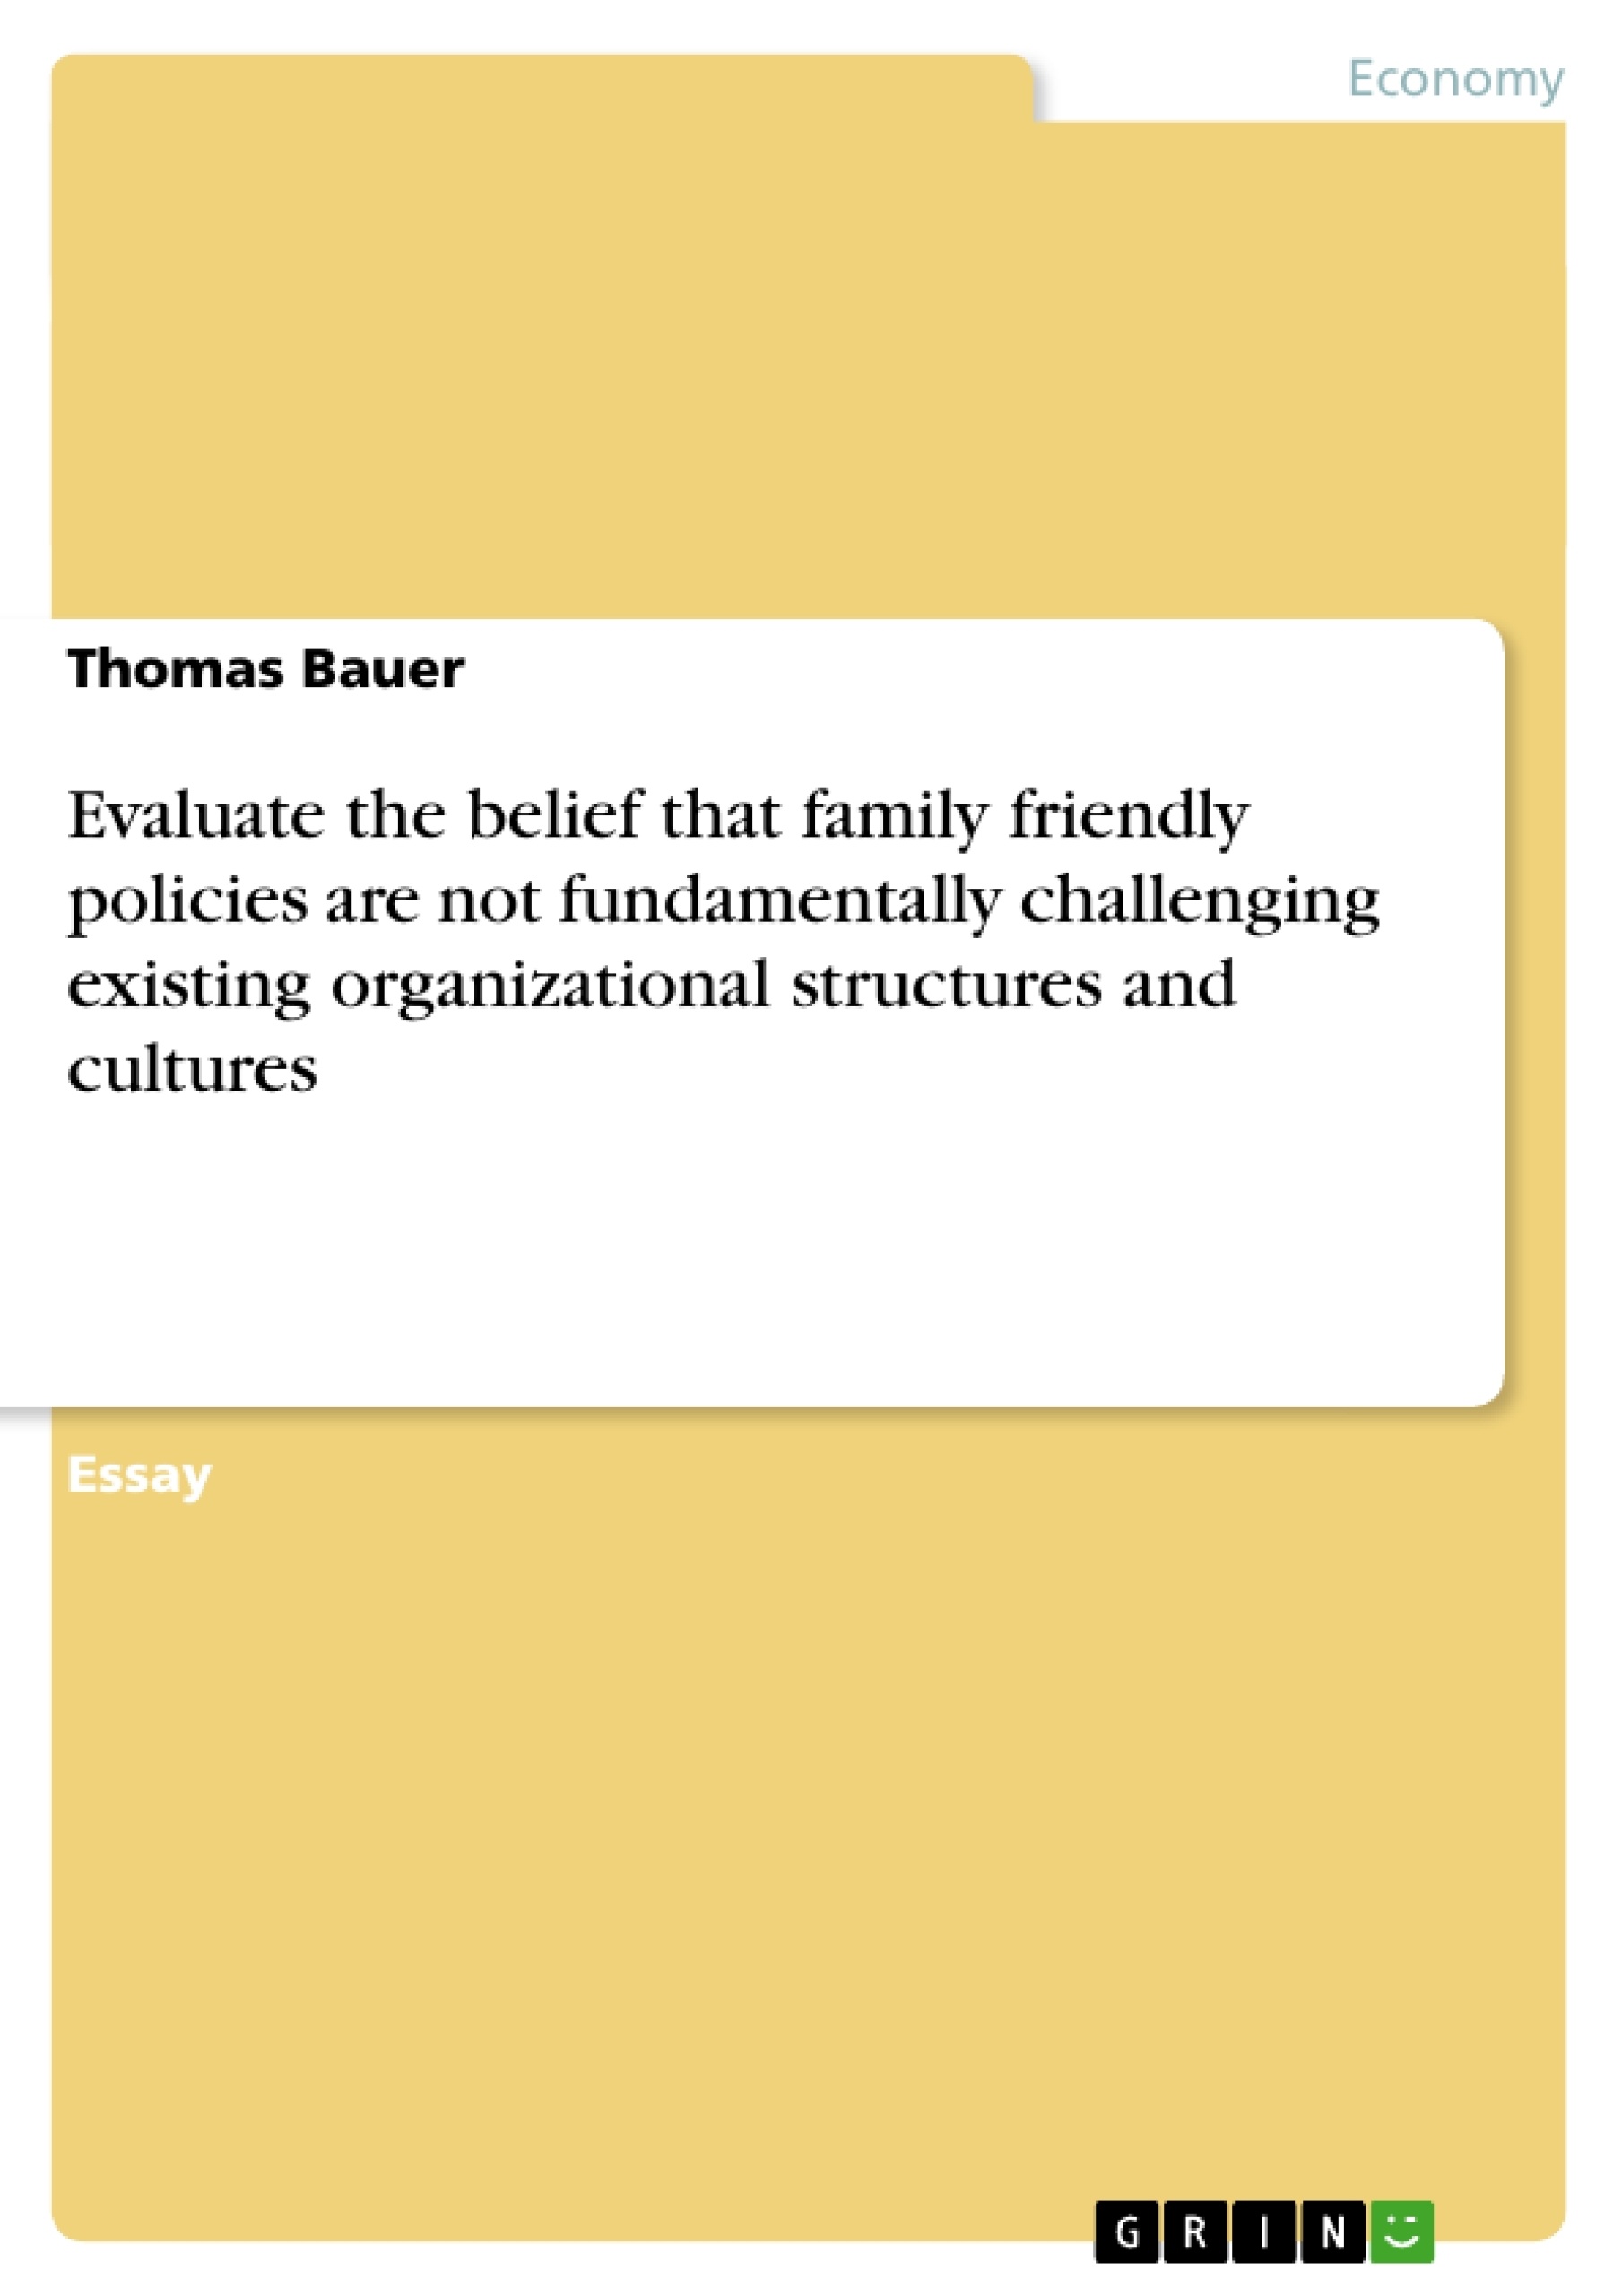 Title: Evaluate the belief that family friendly policies are not fundamentally challenging existing organizational structures and cultures